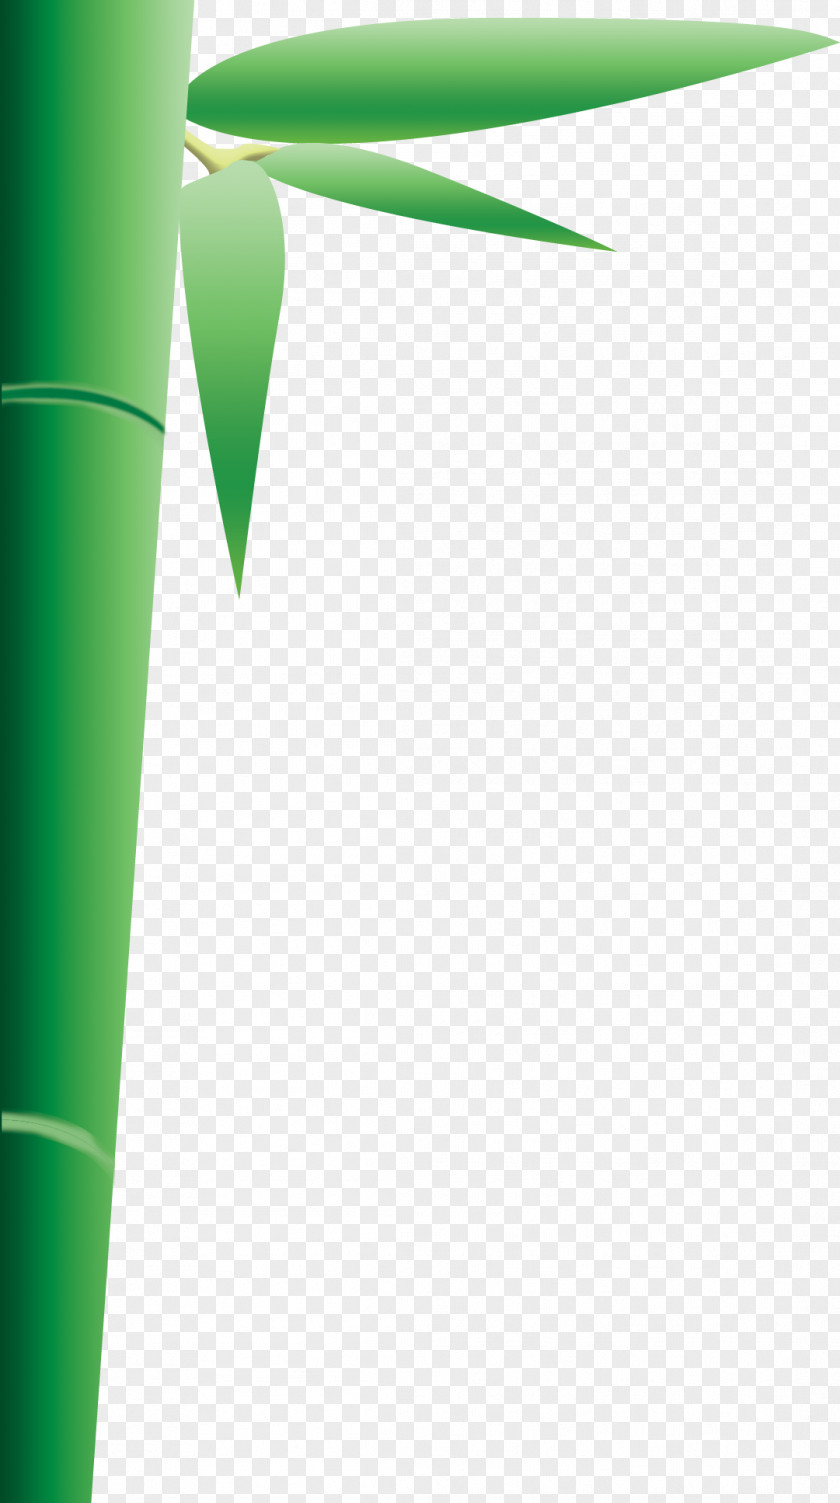 Bamboo Graphic Design Green Pattern PNG